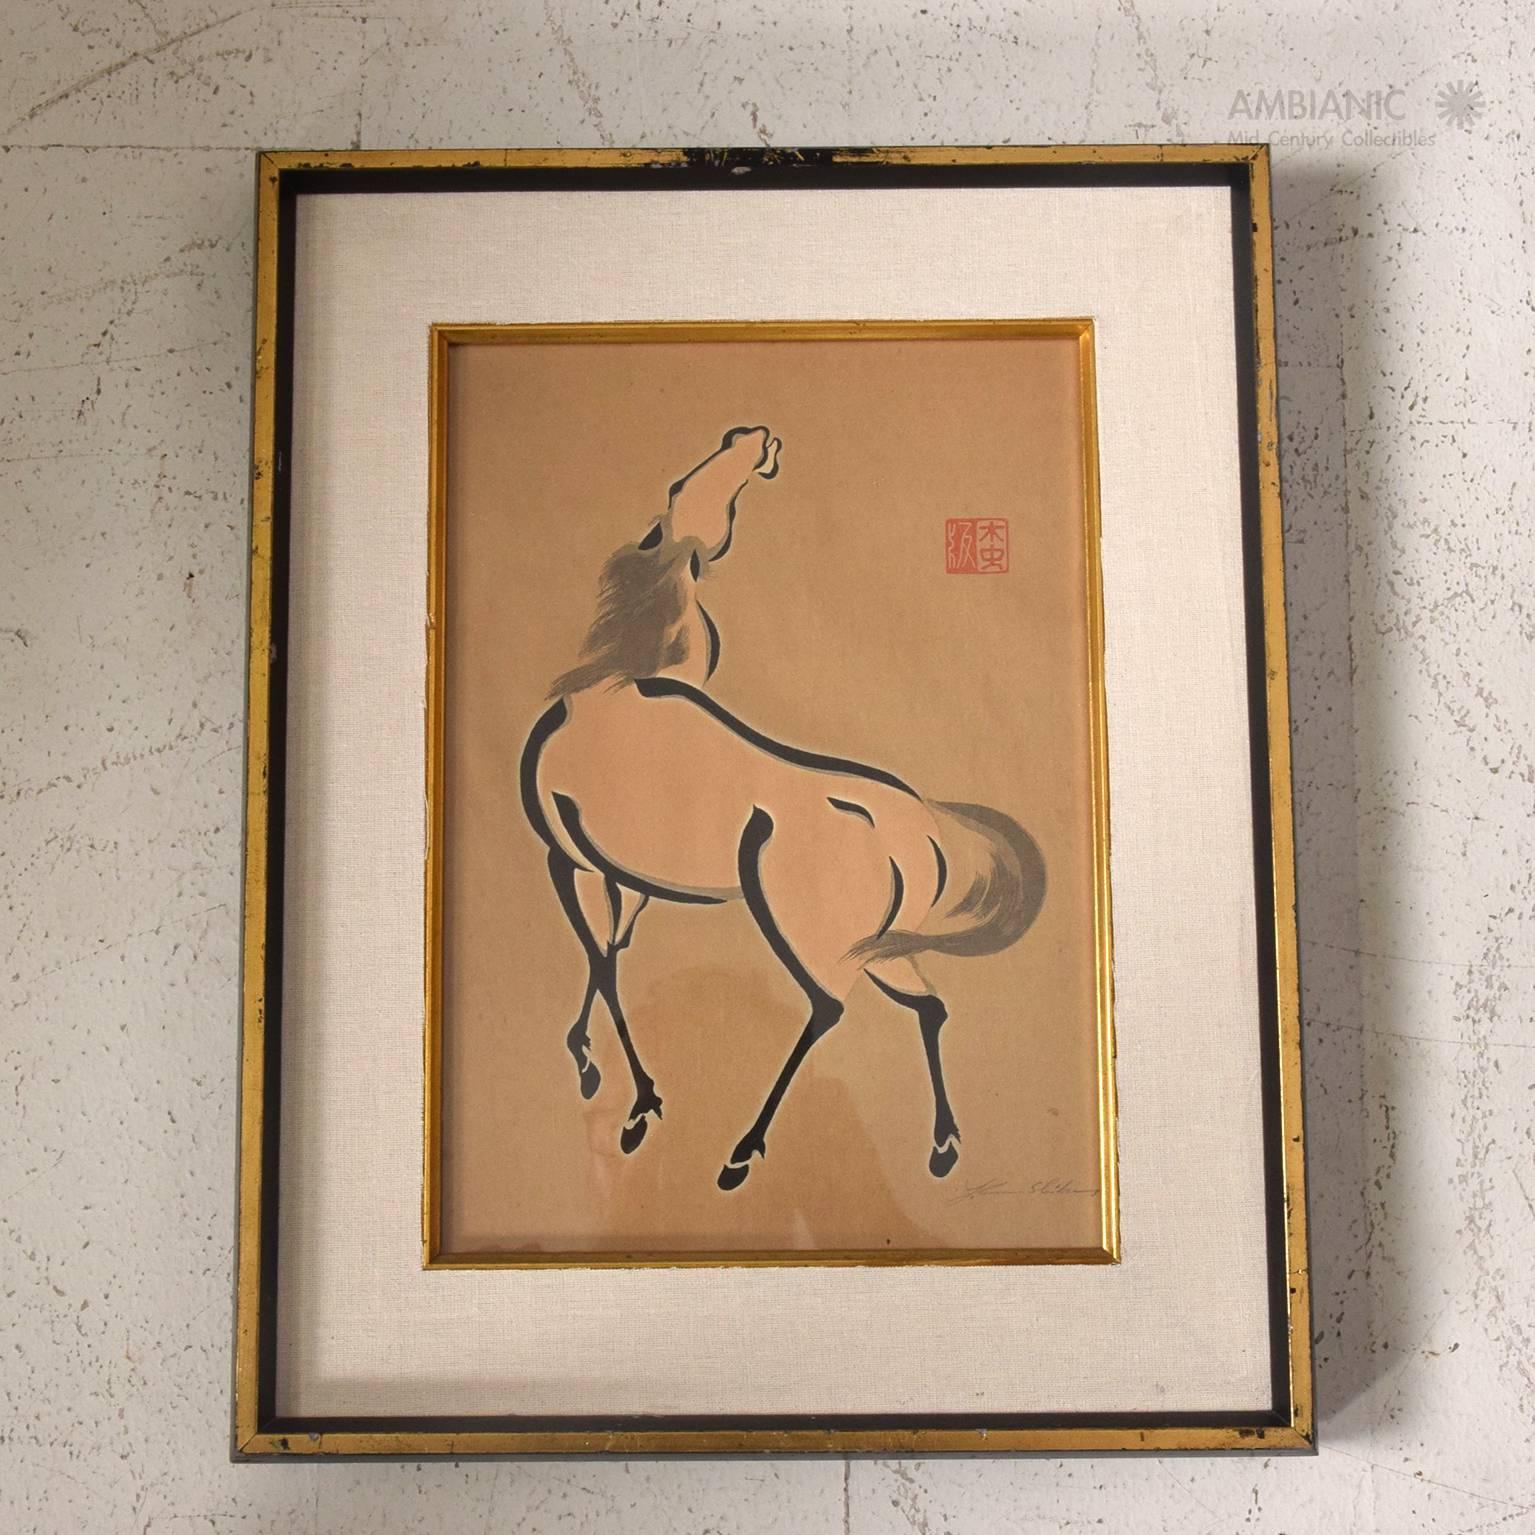 For your consideration a set of wood block prints on paper Japanese horse paintings .

Signed.

Original frame. Some fade and stains present. 

Horizontal painting: 18